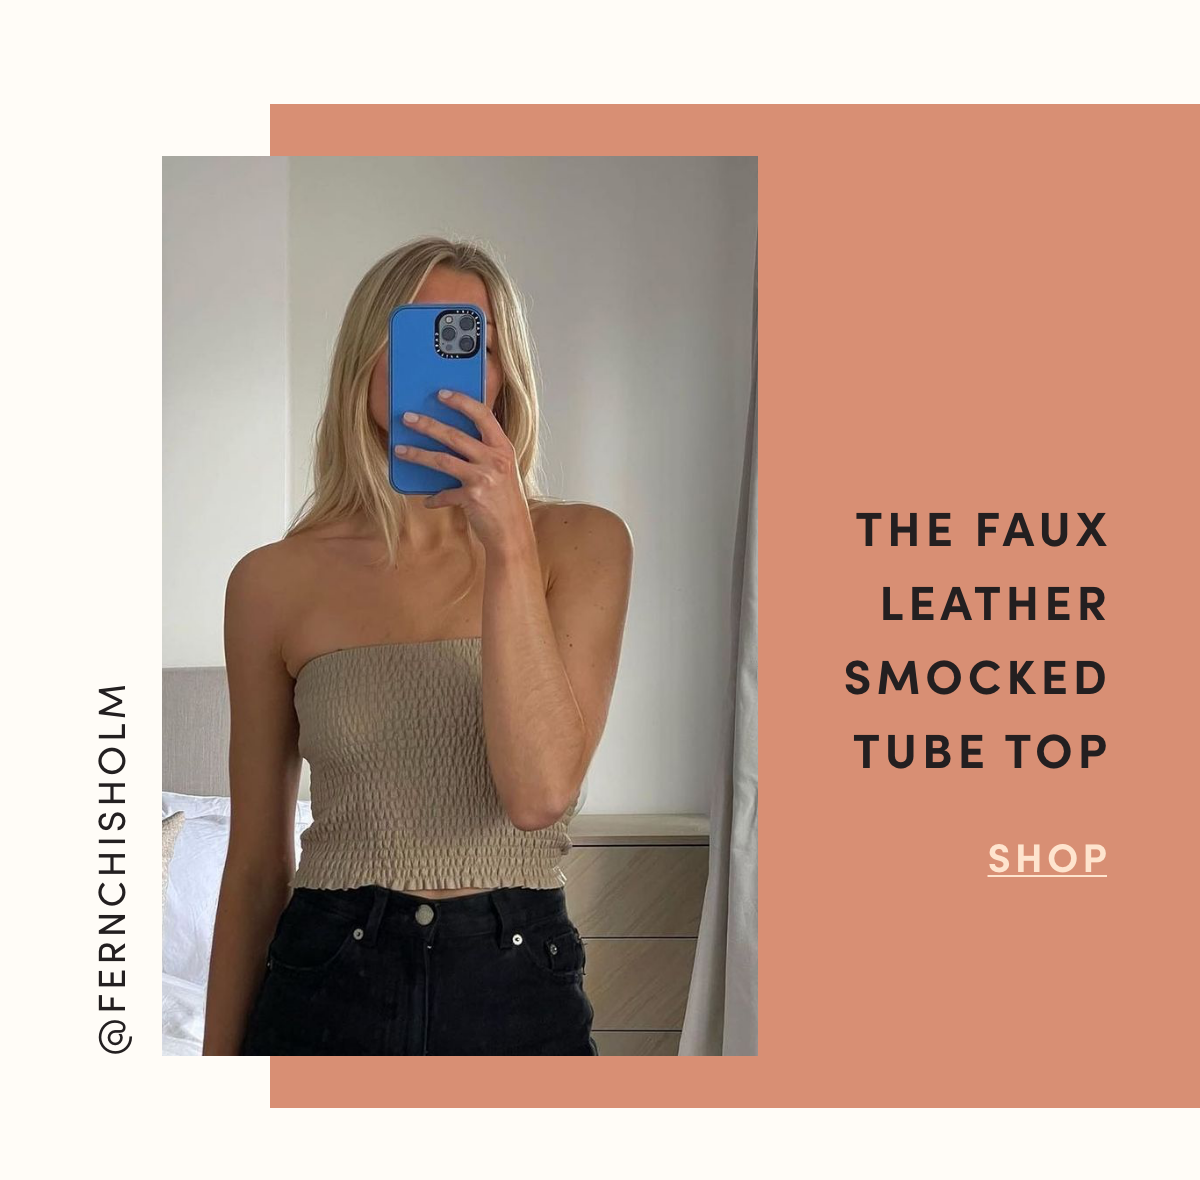 The Faux Leather Smocked Tube Top